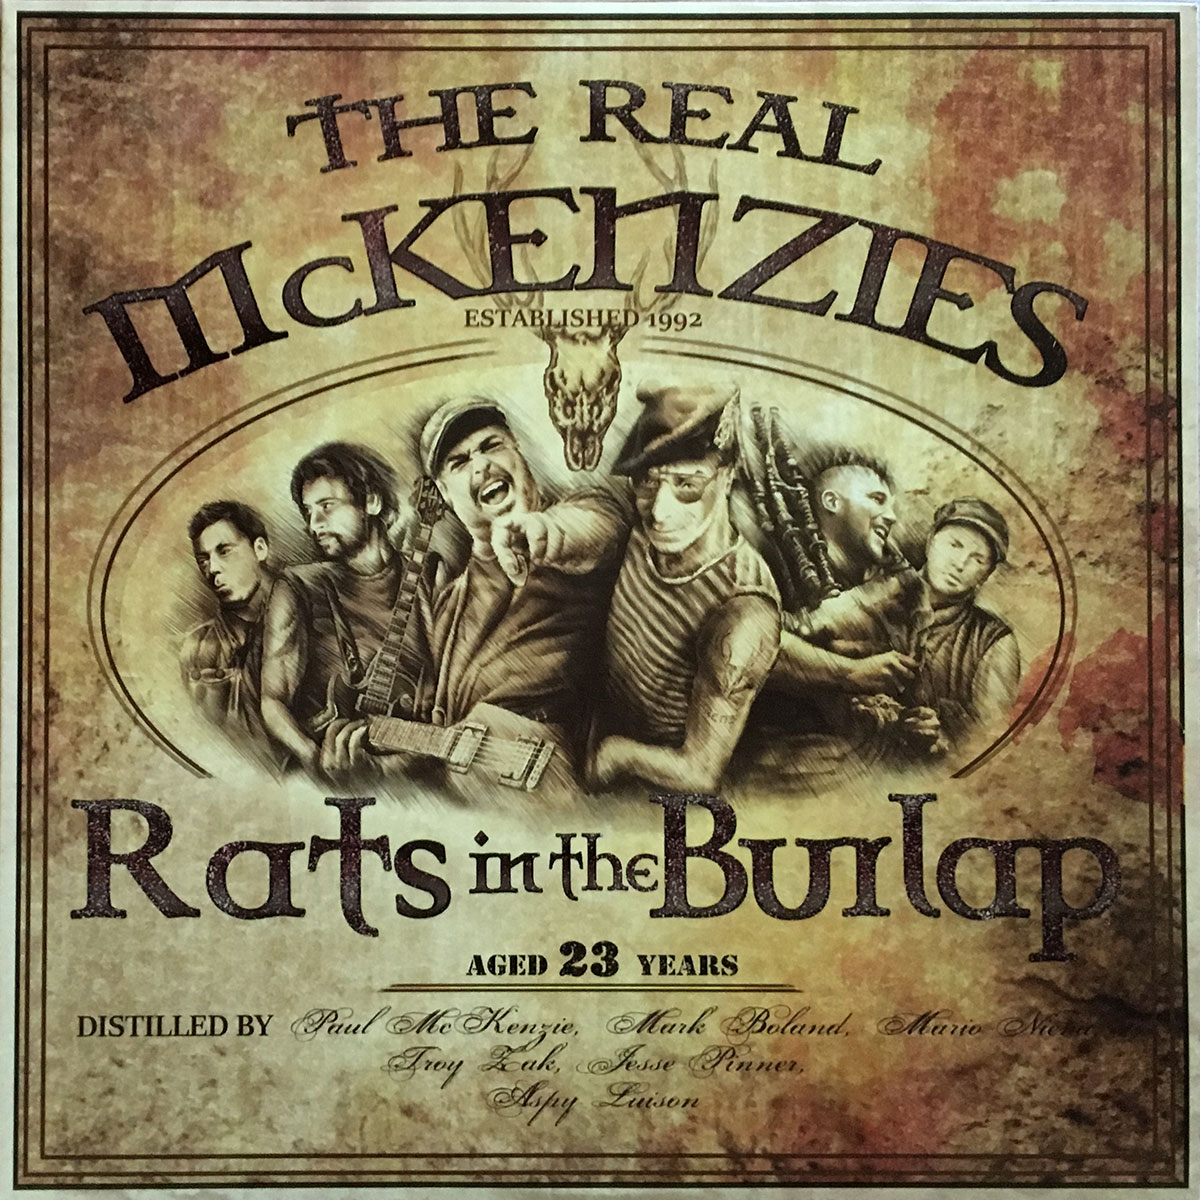 The Real McKenzies - Rats in the Burlap